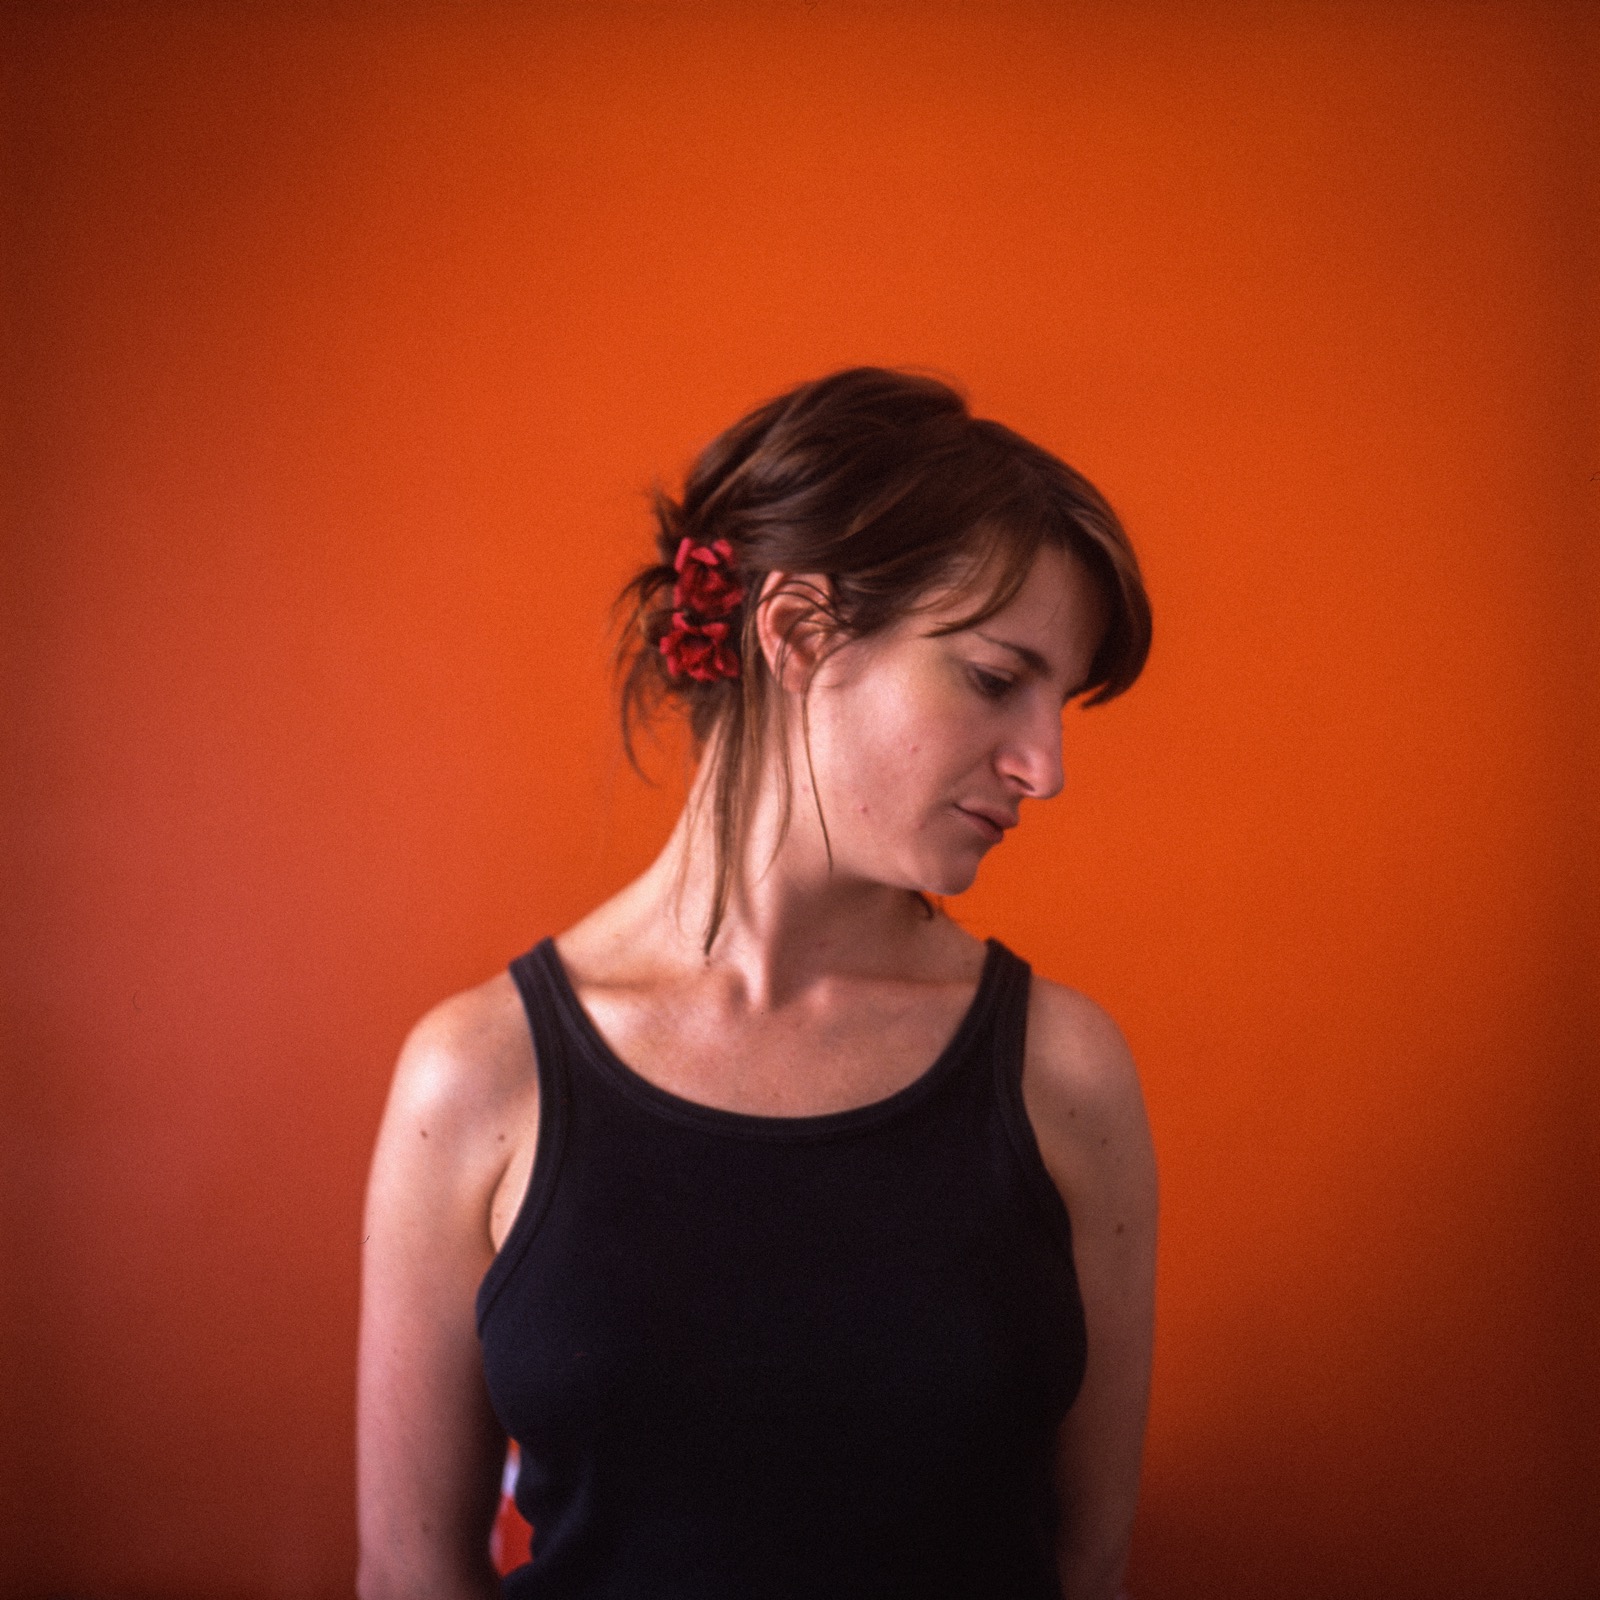 Portrait of a young woman with an orange background.